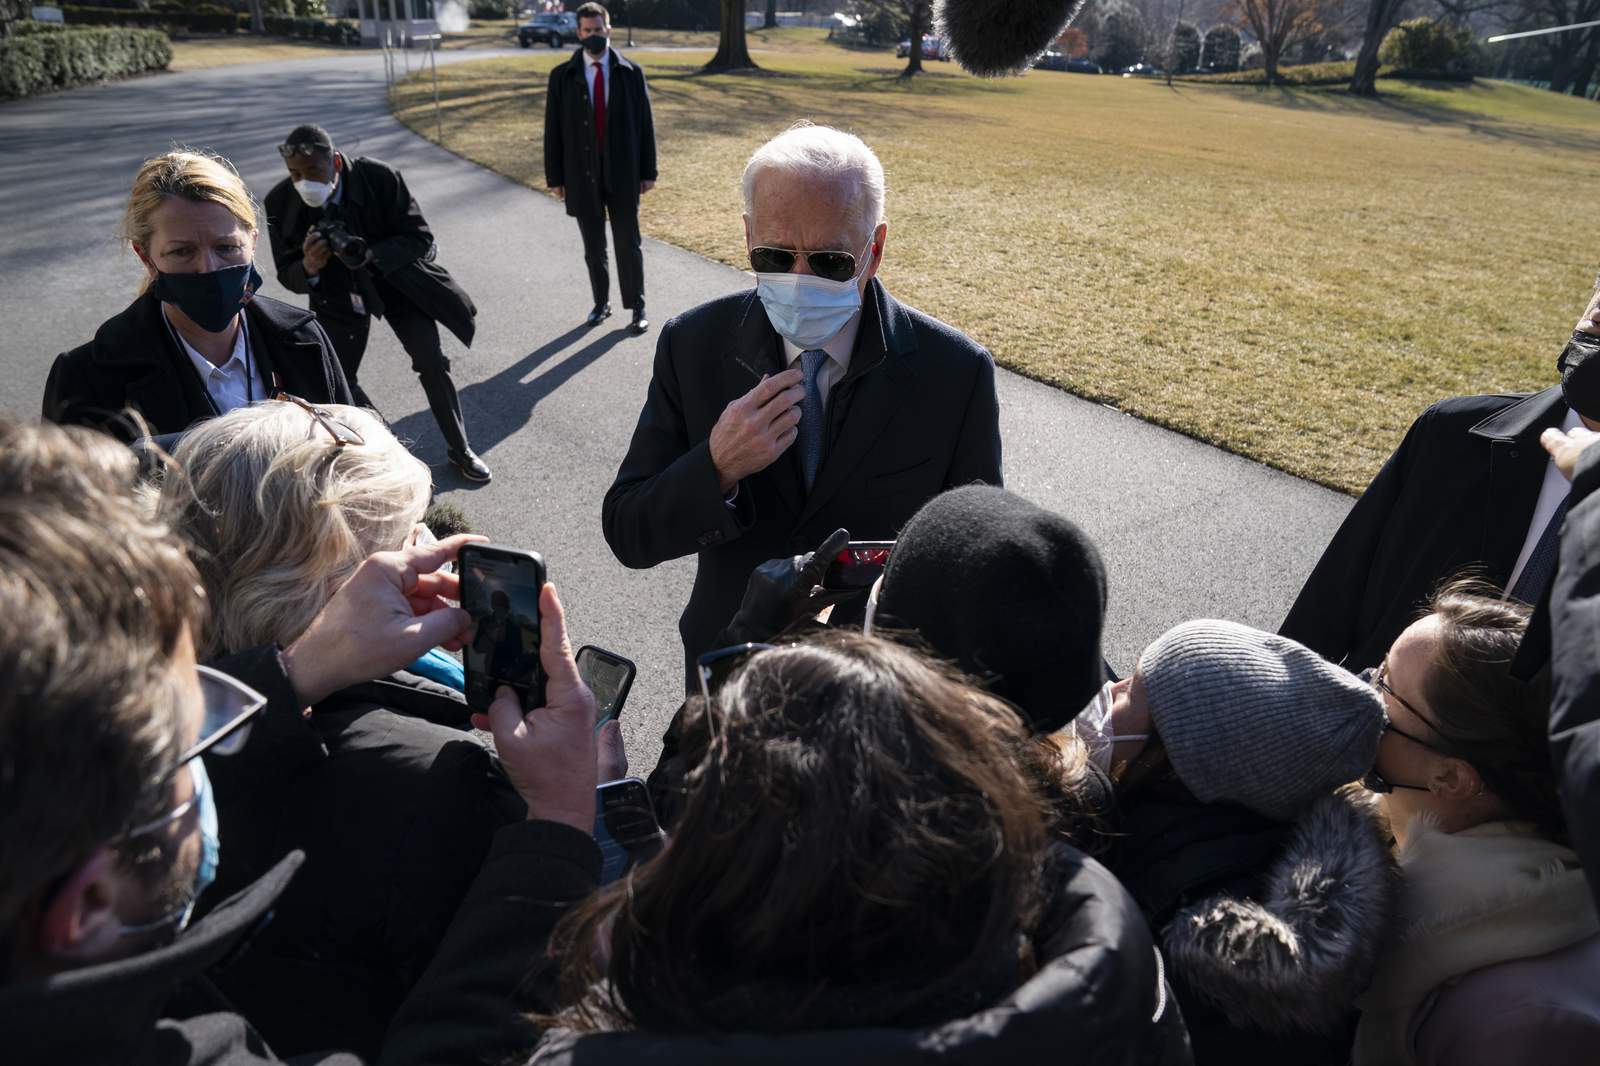 Dems propose $1,400 payments as part of Biden virus relief